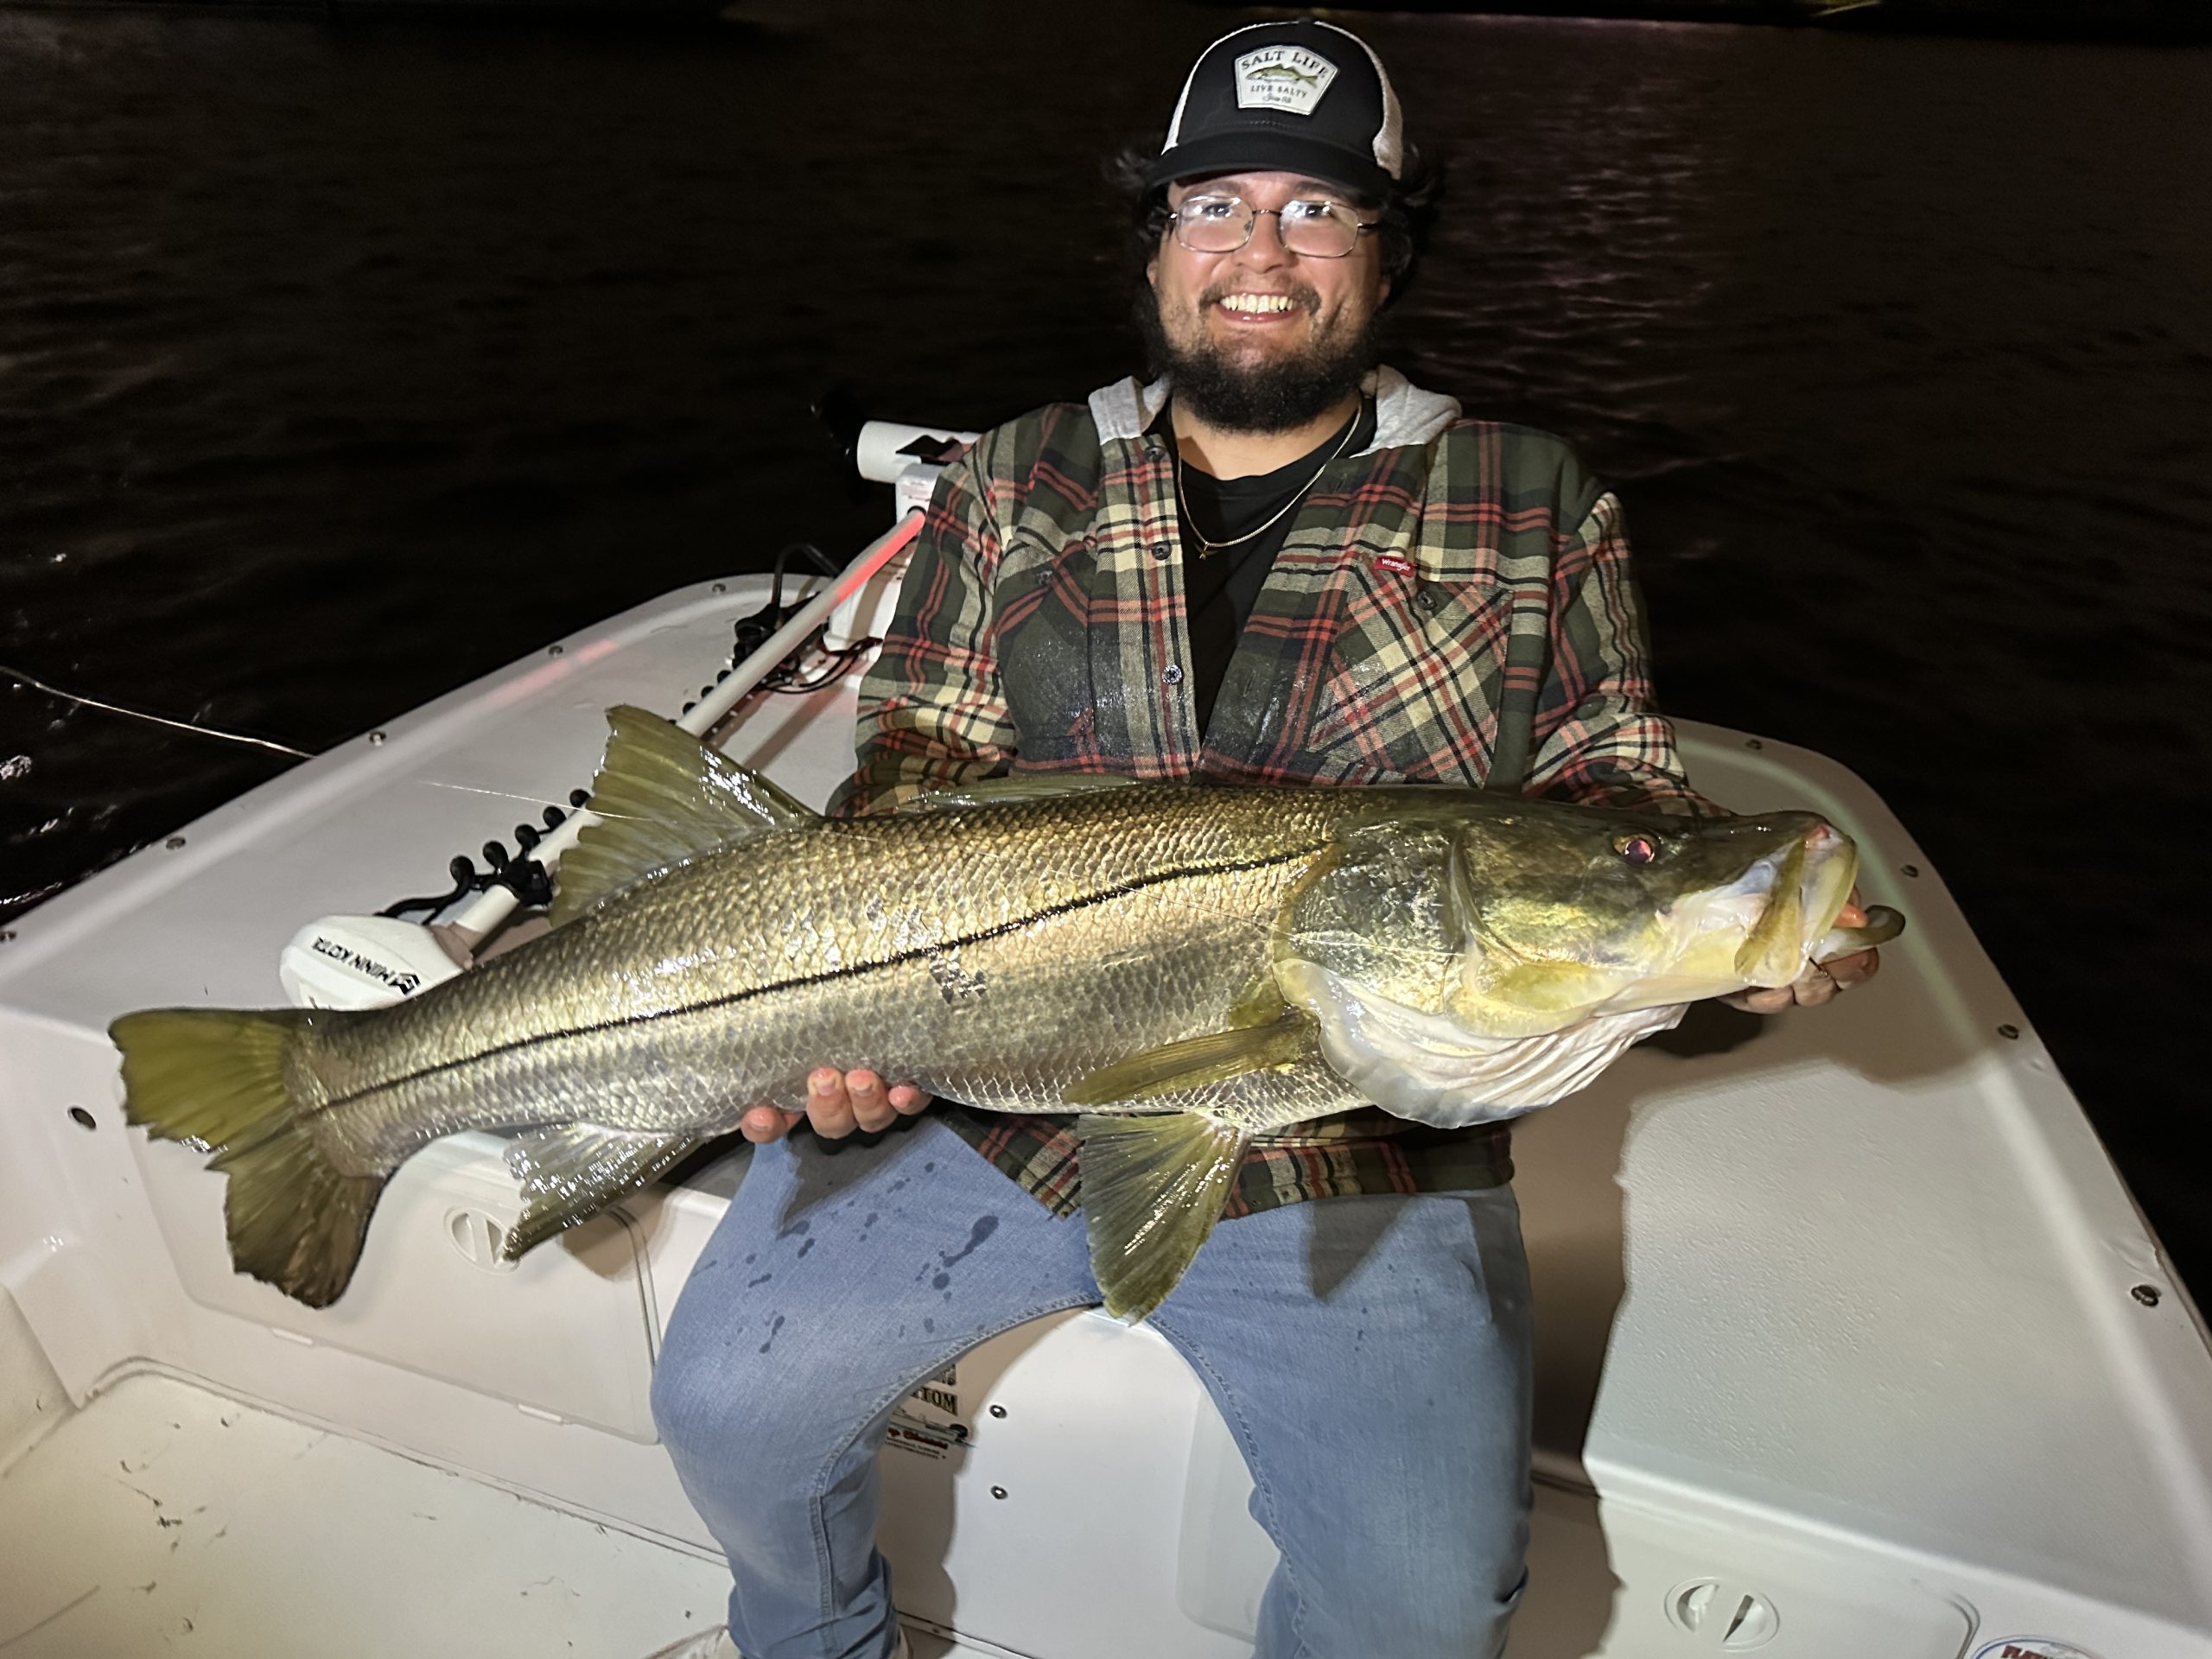 40 inch snook in Ft. Lauderdale